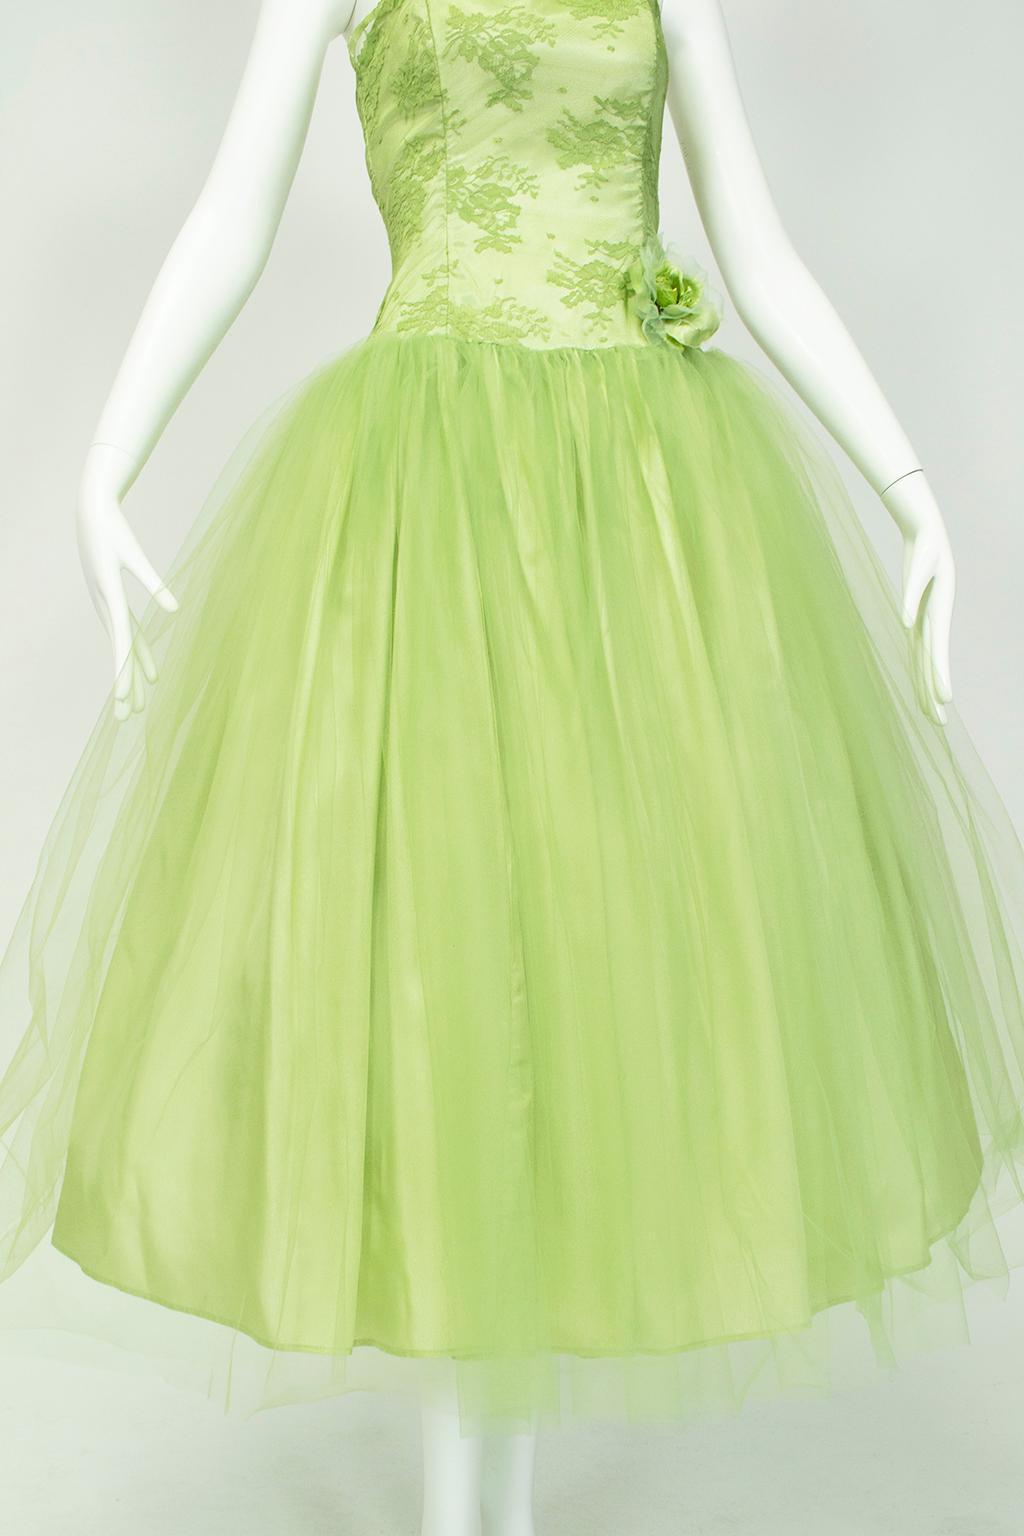 Jessica McClintock for Gunne Sax Strapless Lime Ballerina Dress – Small, 2003 In Good Condition For Sale In Tucson, AZ